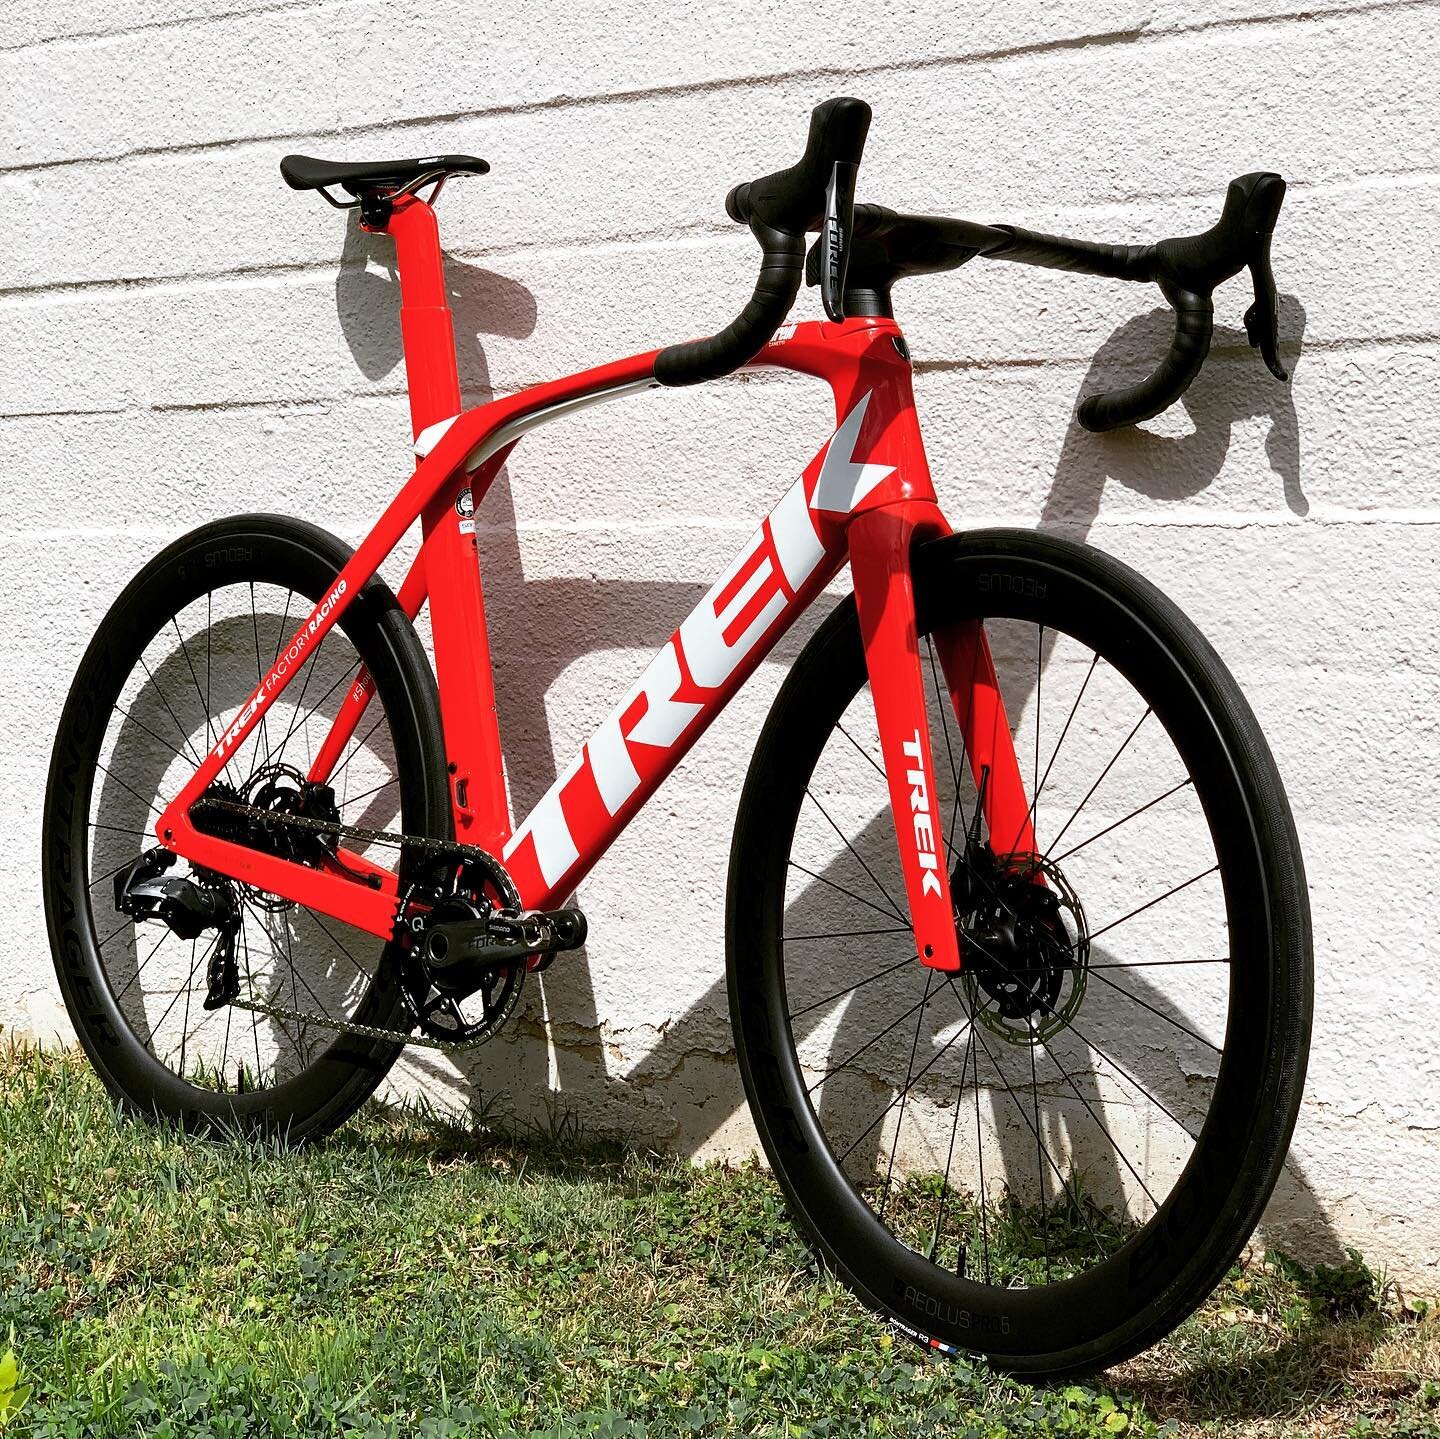 Here&rsquo;s a little project we completed a few weeks ago for our local speedster racer. With it&rsquo;s aero design, this bike is a rocket ship with speed and aerodynamics reigning supreme and giving it its cool looking profile. .
#aerobike #roadbi